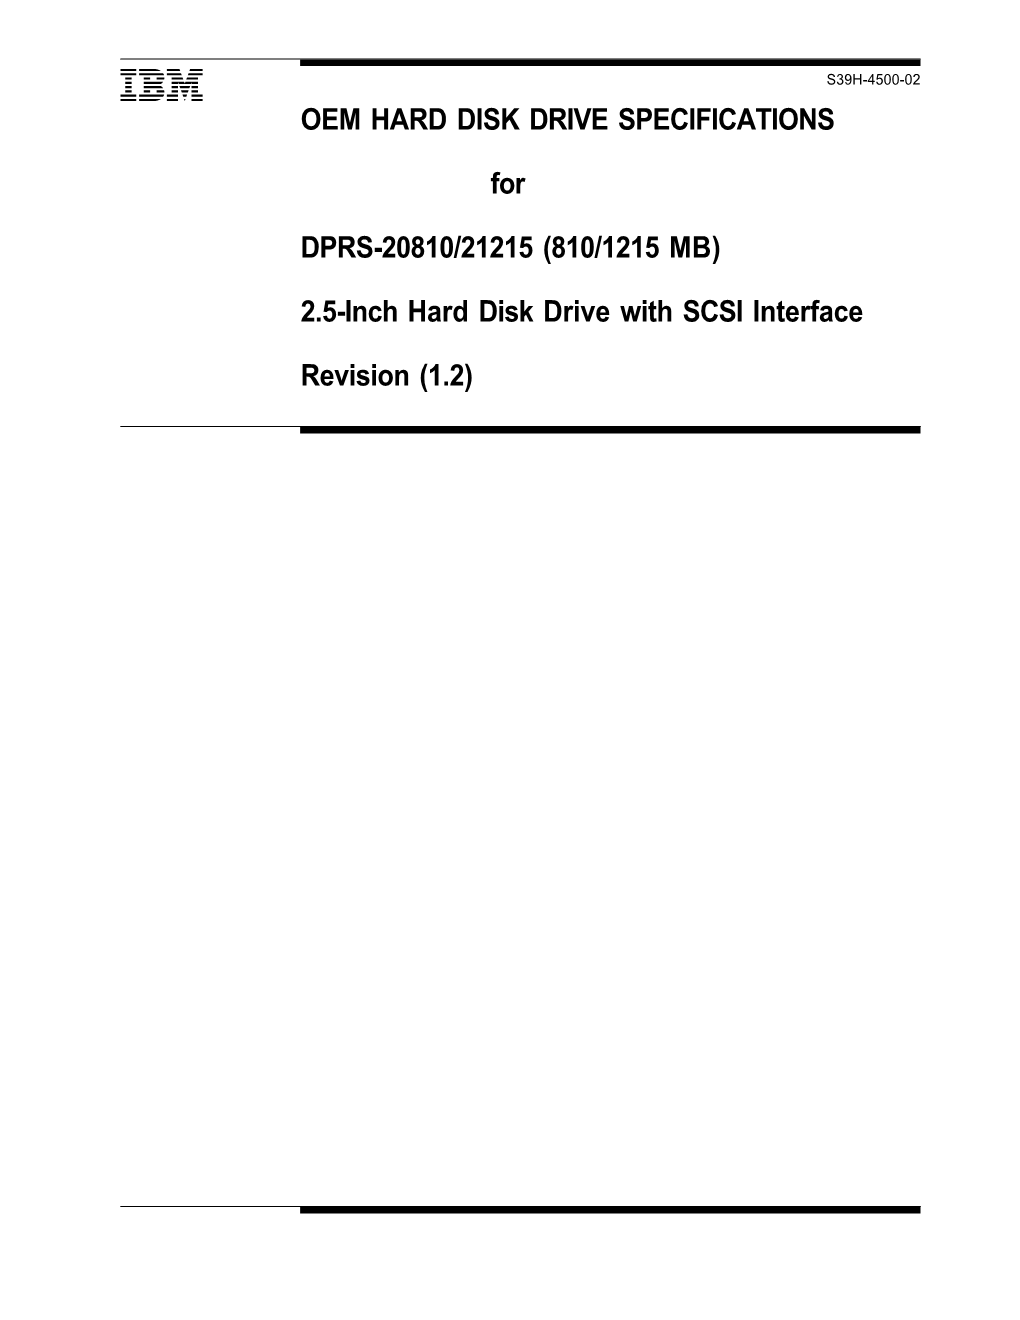 OEM HARD DISK DRIVE SPECIFICATIONS for DPRS